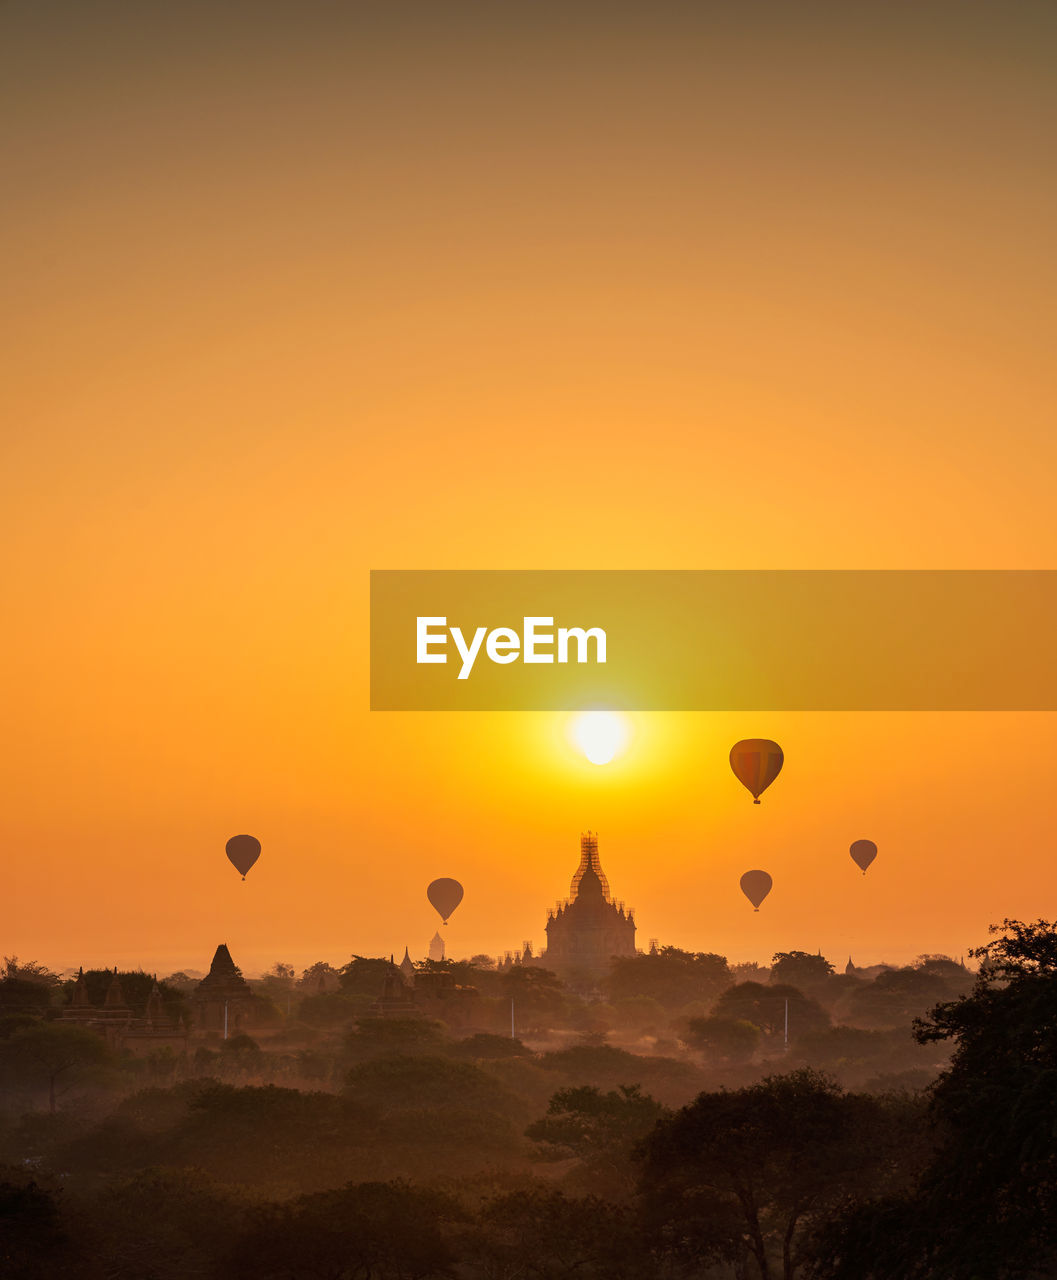 Myanmar. bagan is an ancient with many pagoda of historic buddhist temples and stupas.